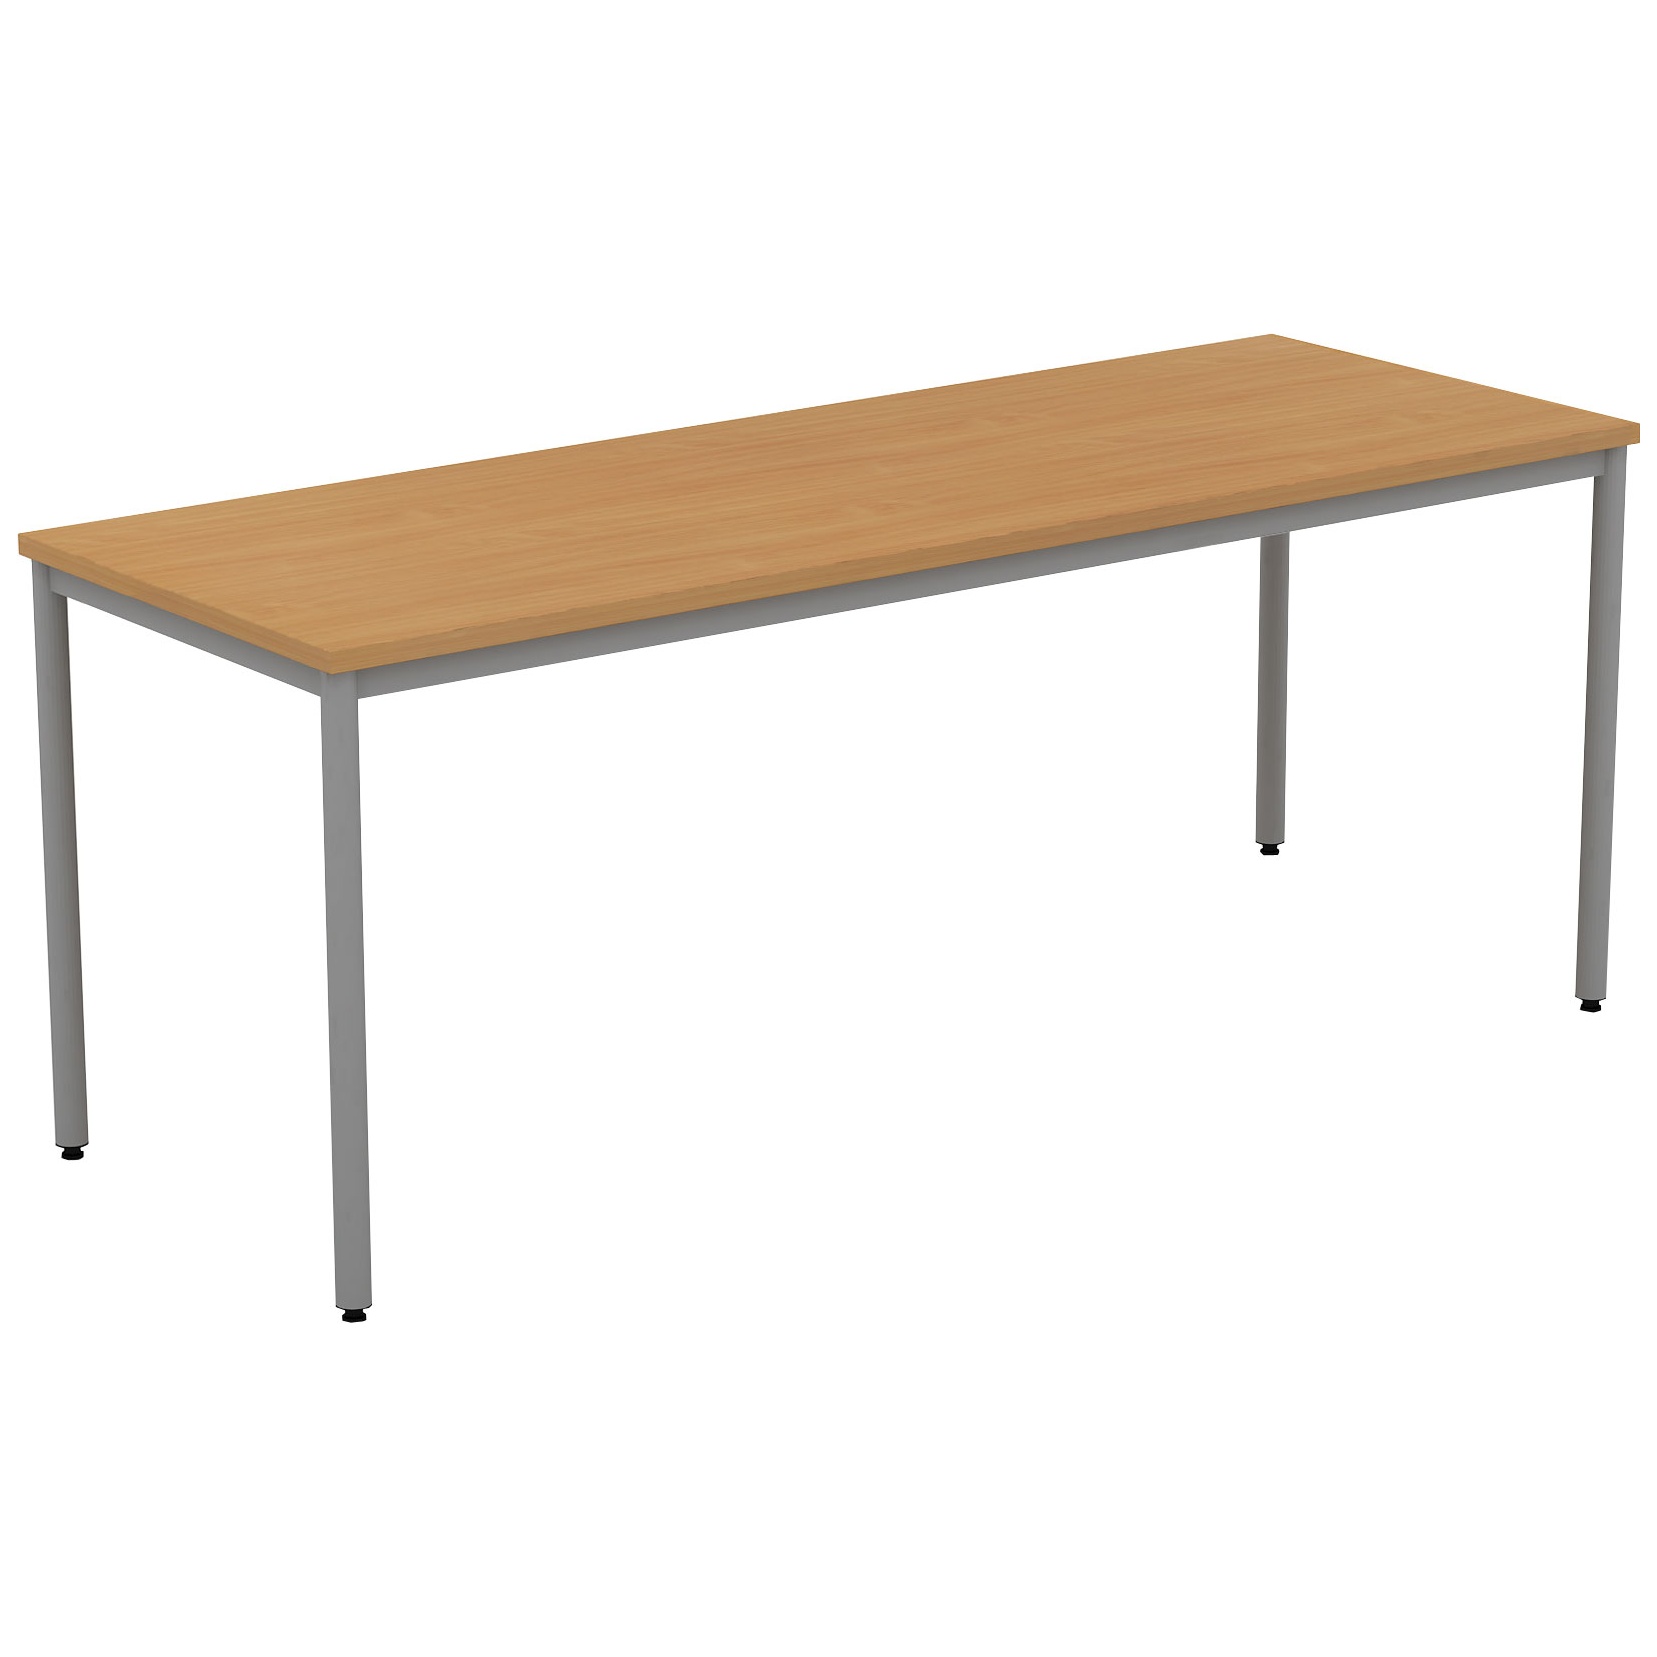 Alpha Plus Heavy Duty Rectangular Meeting Table Free Uk Delivery